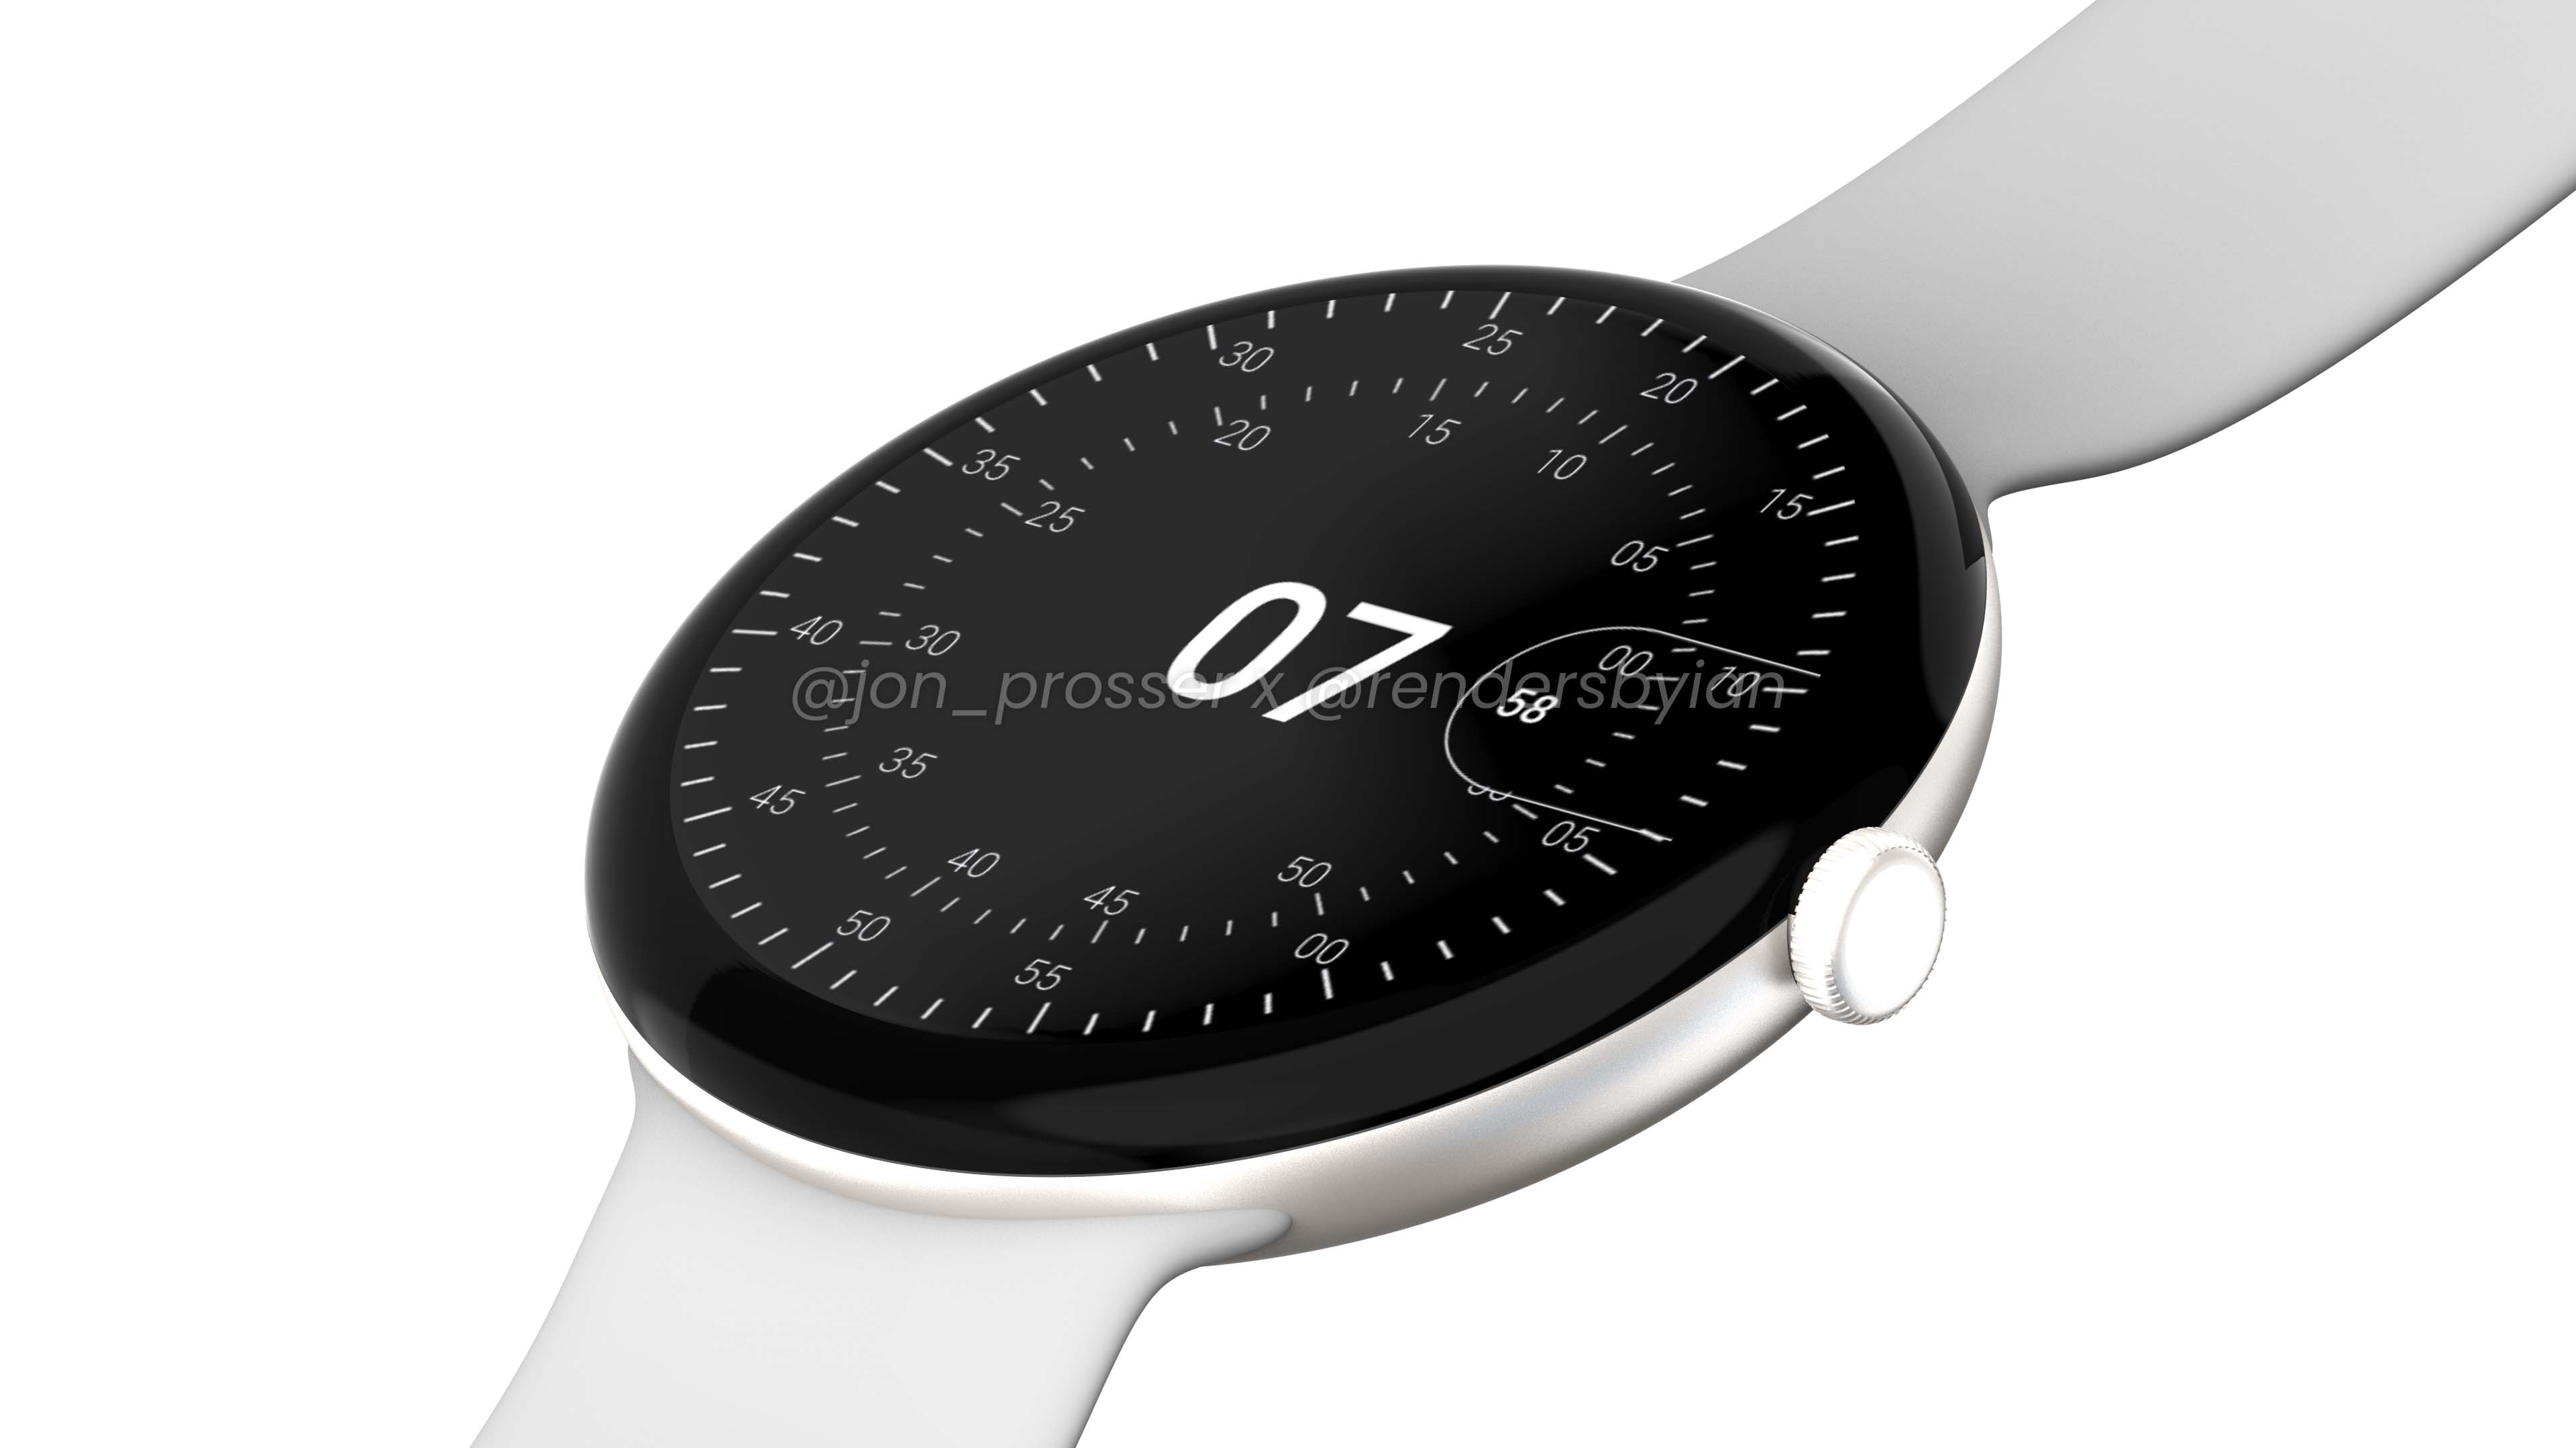 Google Pixel Watch With Round Design and Wear OS Support Leaked: Specs